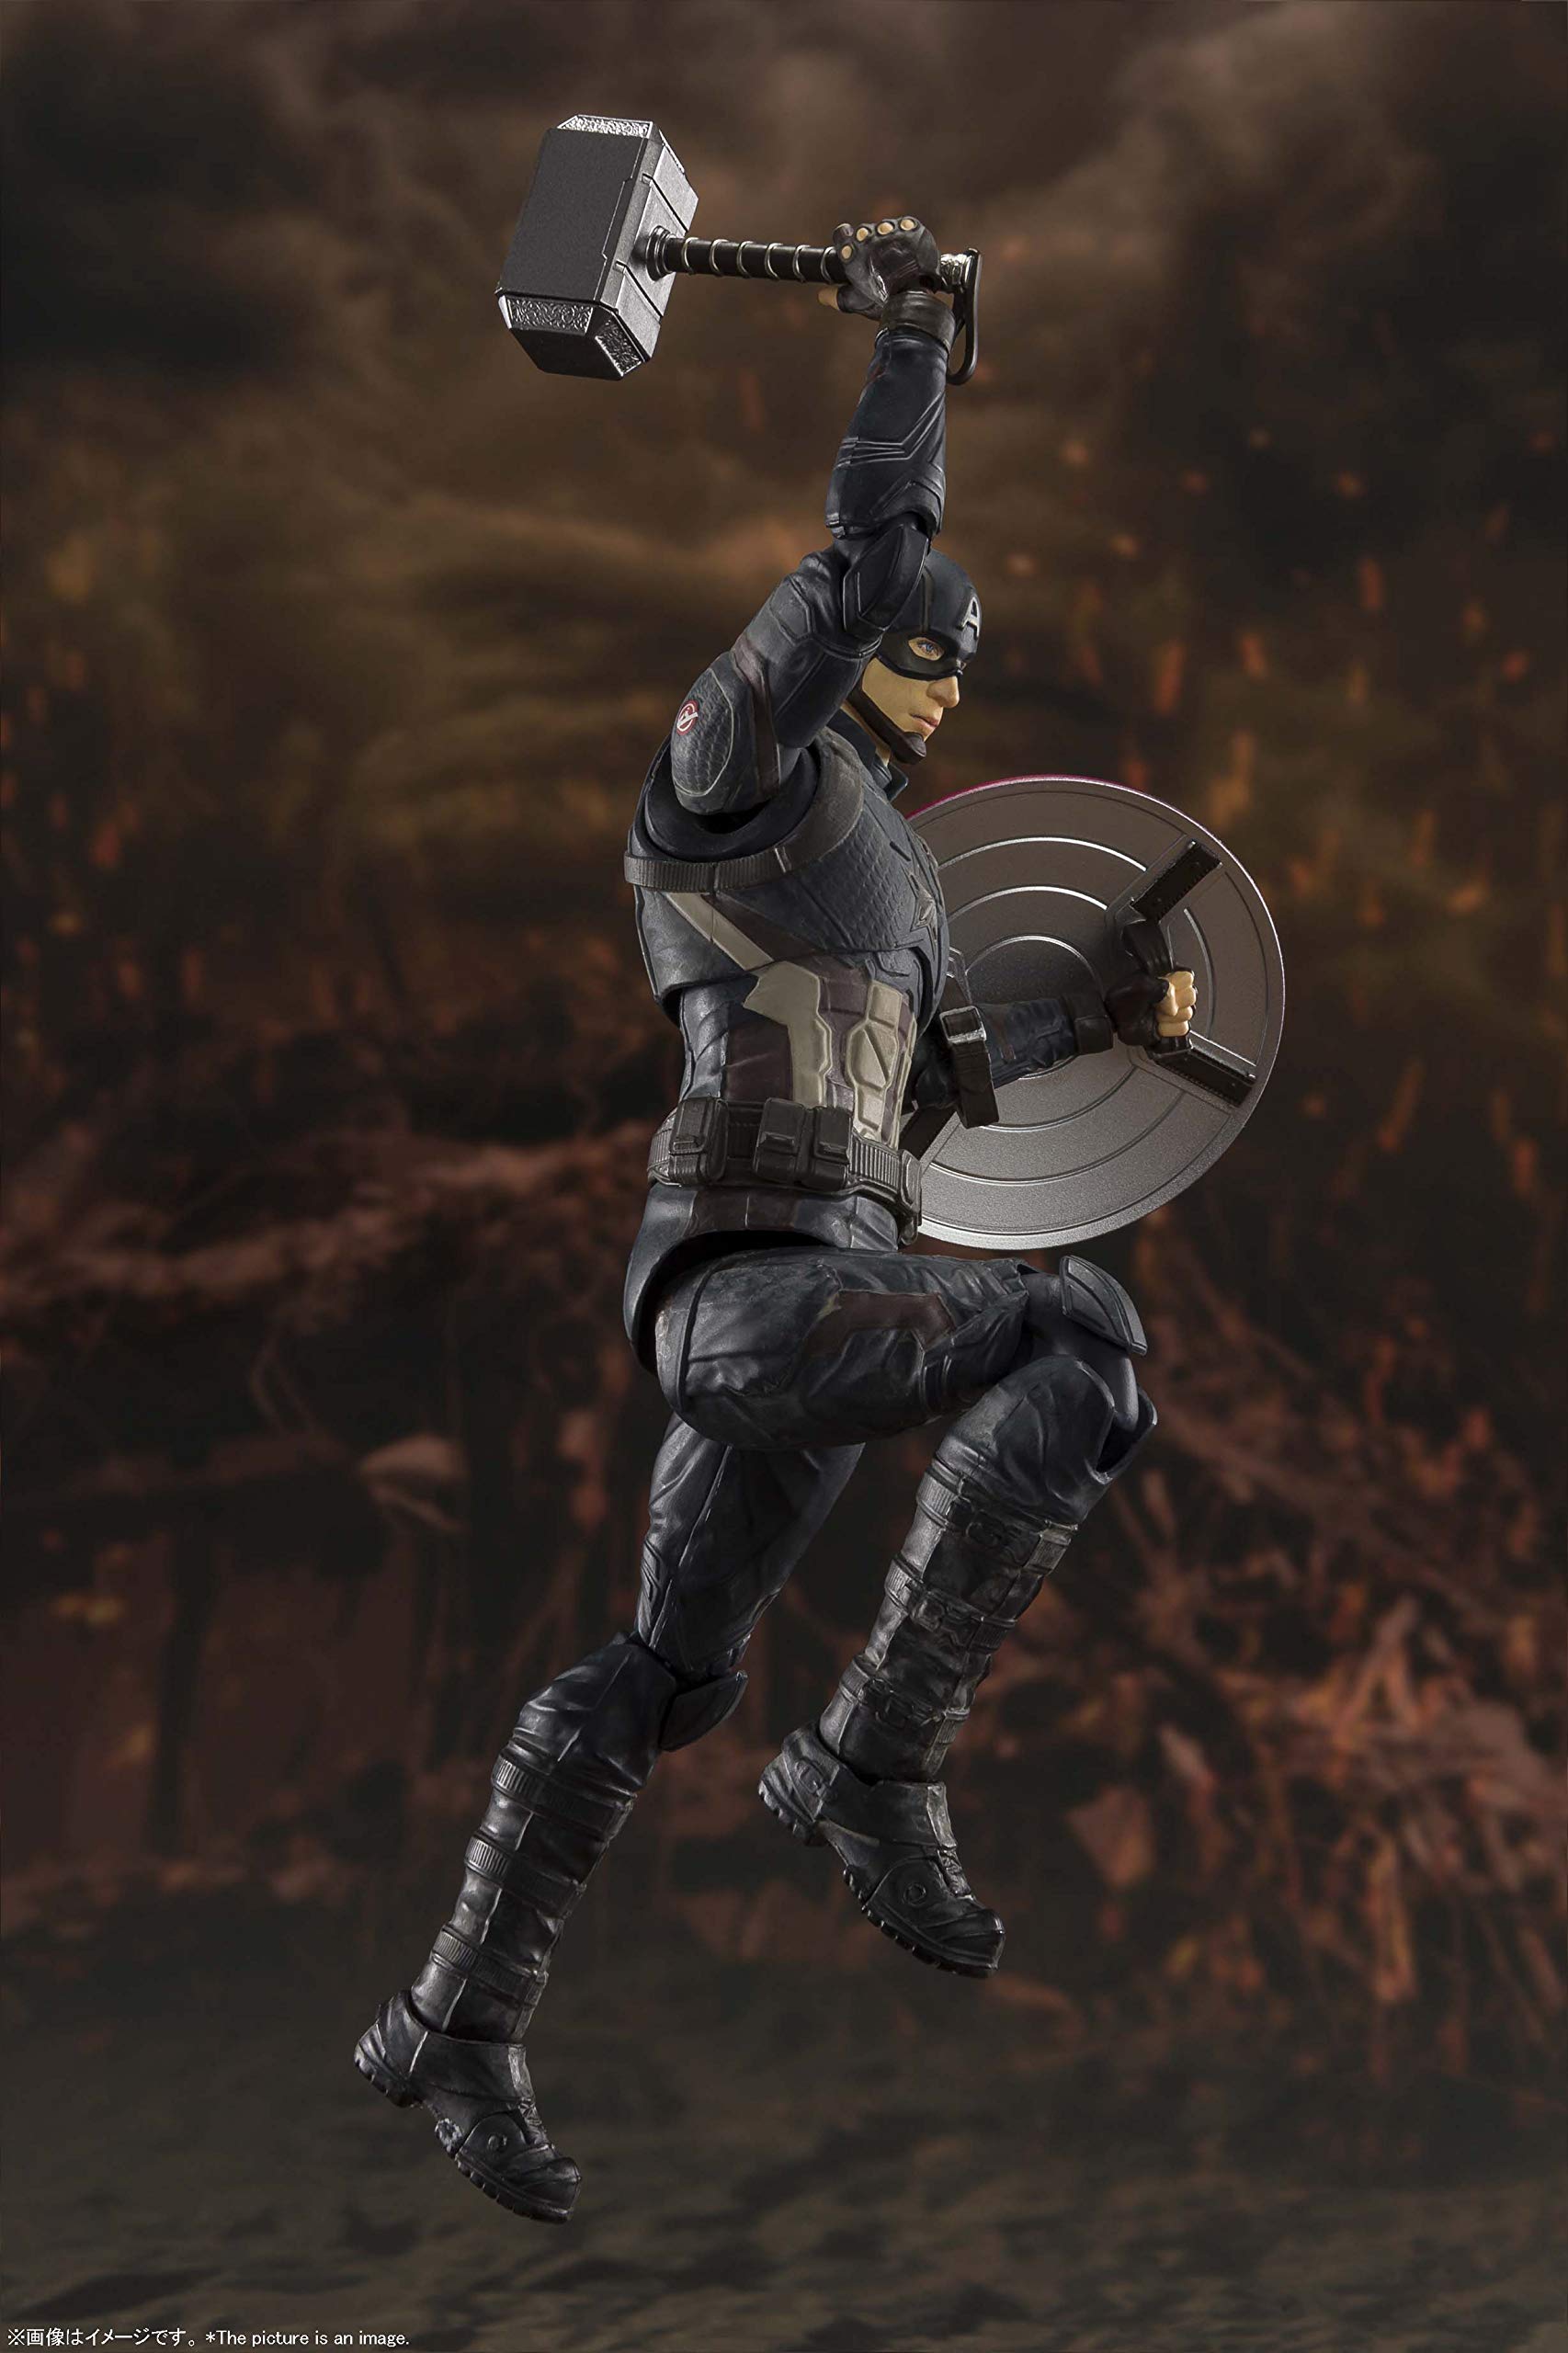 TAMASHII NATIONS S.H. Figuarts Captain America -Final Battle Edition - Avengers: Endgame, Multi, Approx. 150 mm